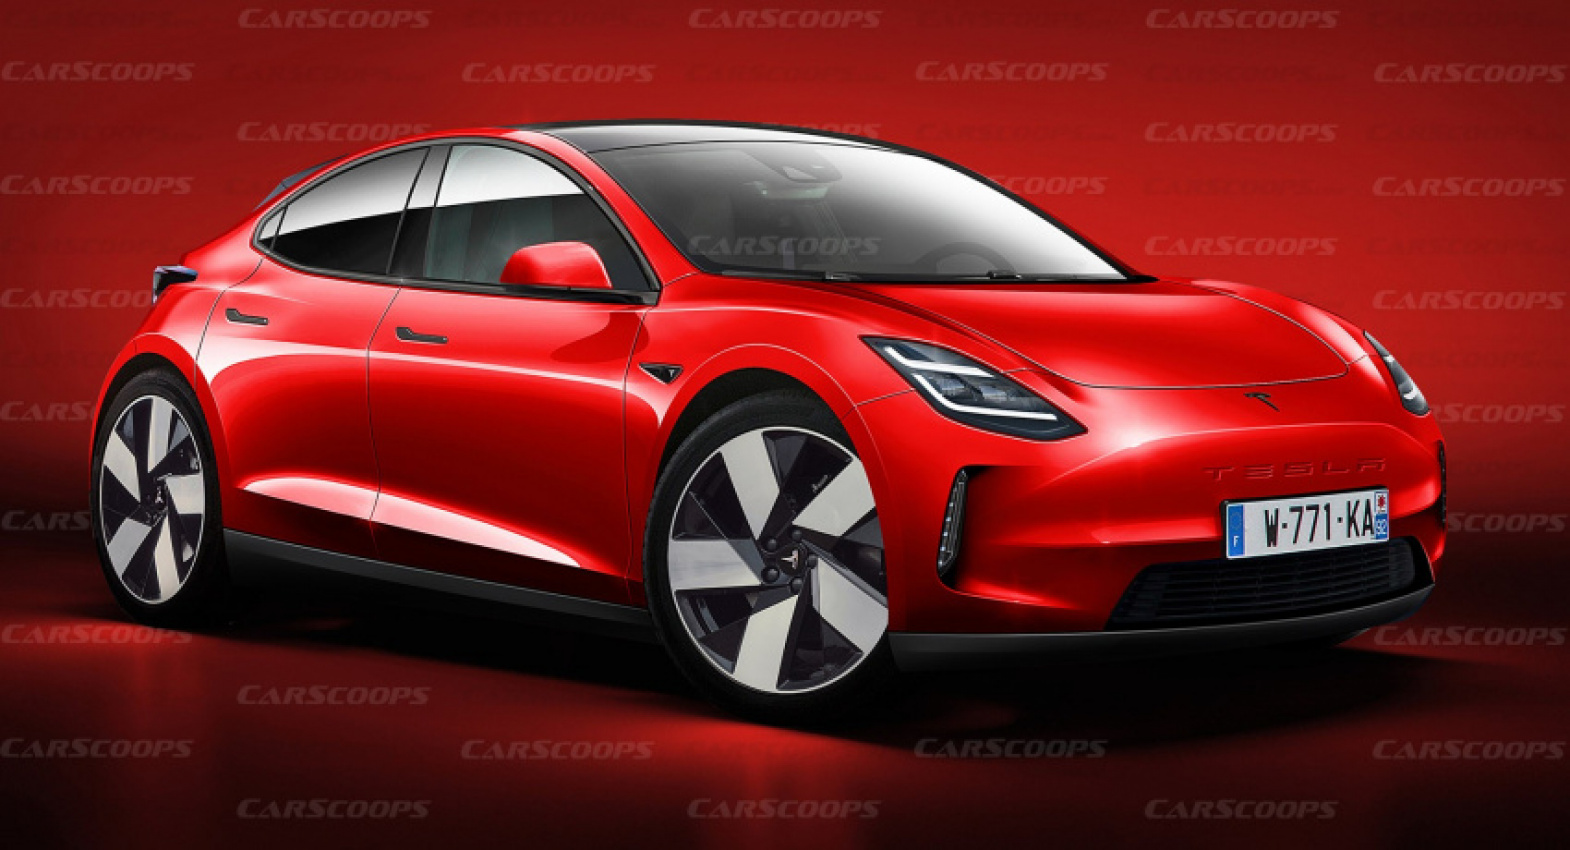 autos, cars, news, tesla, cybertruck, electric vehicles, elon musk, reports, tesla cybertruck, tesla model 2, tesla won’t launch new models in 2022, cybertruck delayed until 2023, entry-level $25,000 ev on hold